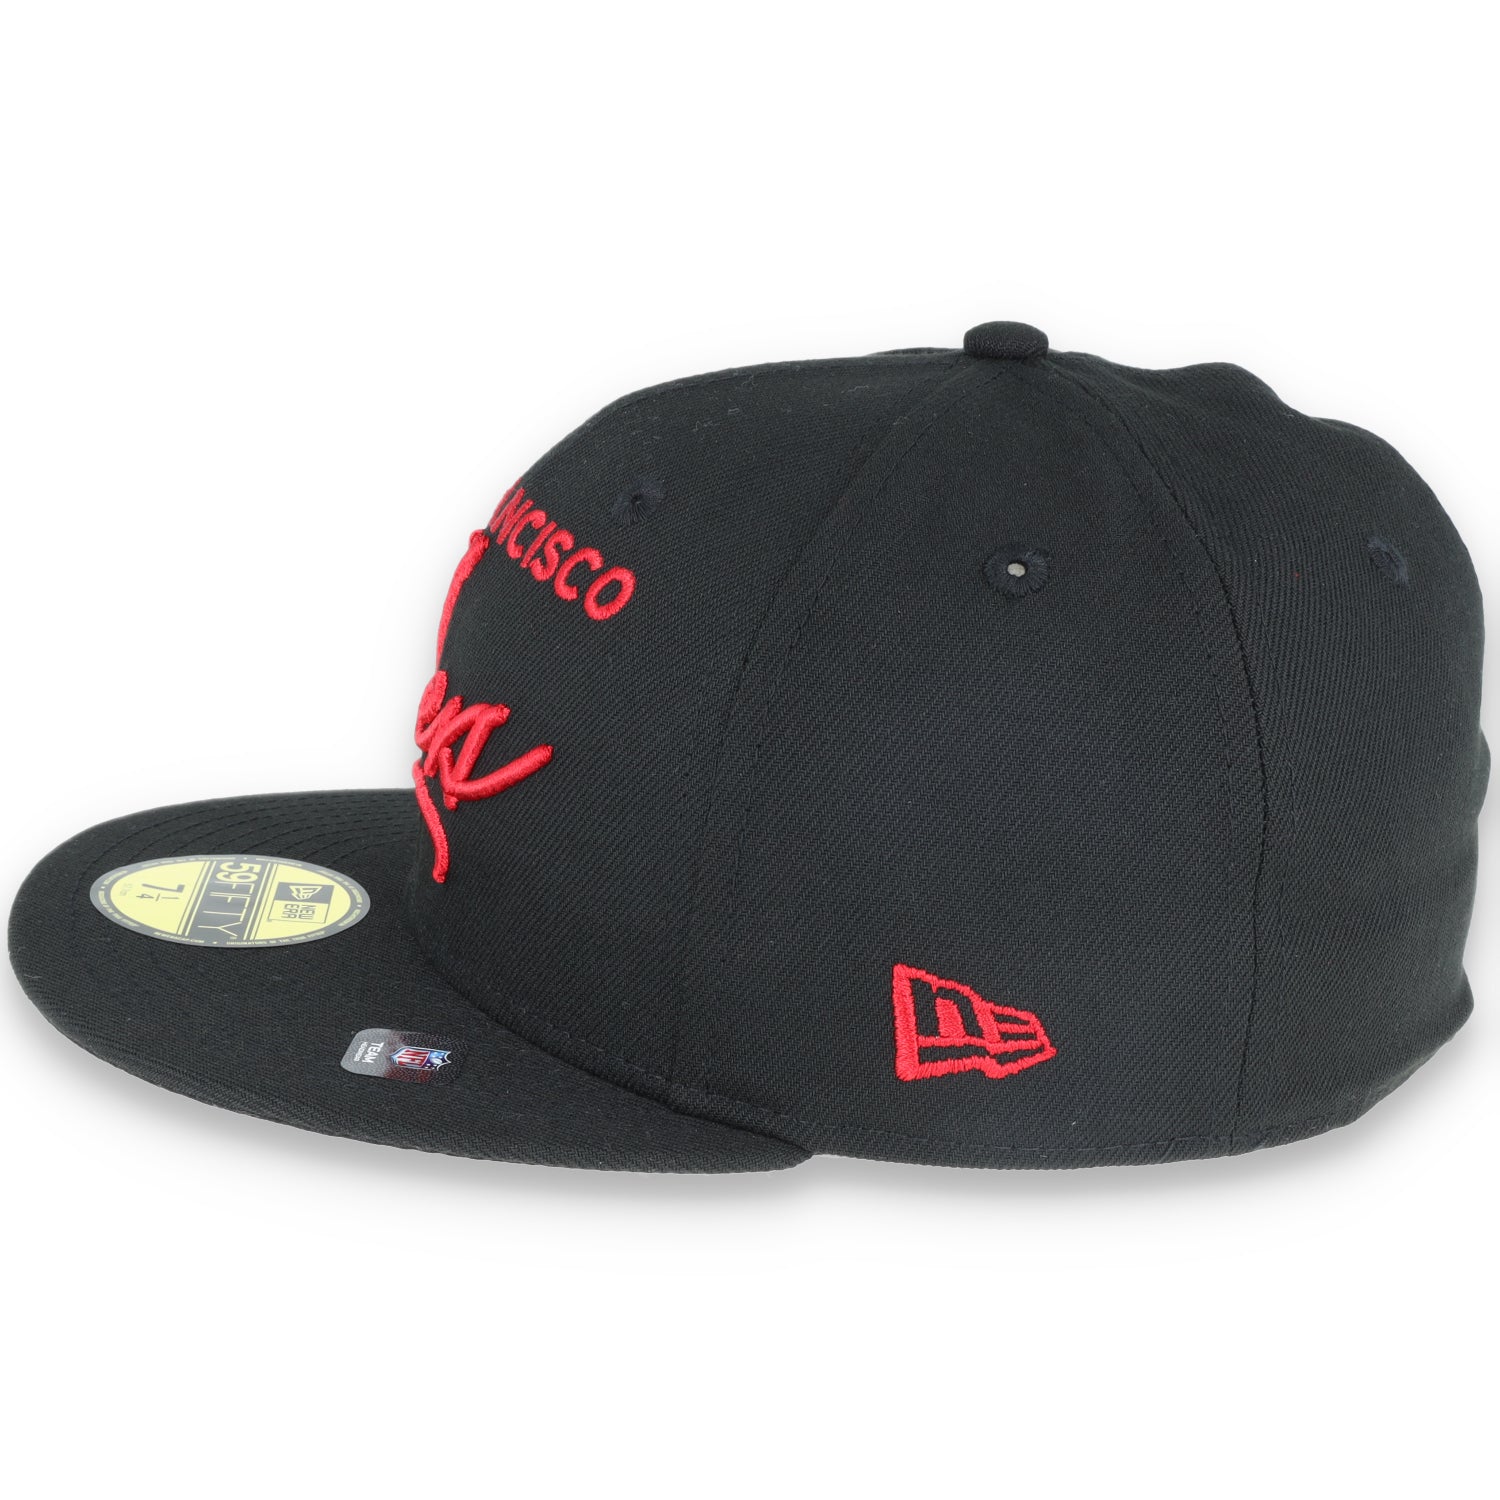 New Era SAN FRANCISCO 49ERS SCRIPTED 59FIFTY FITTED HAT-blk